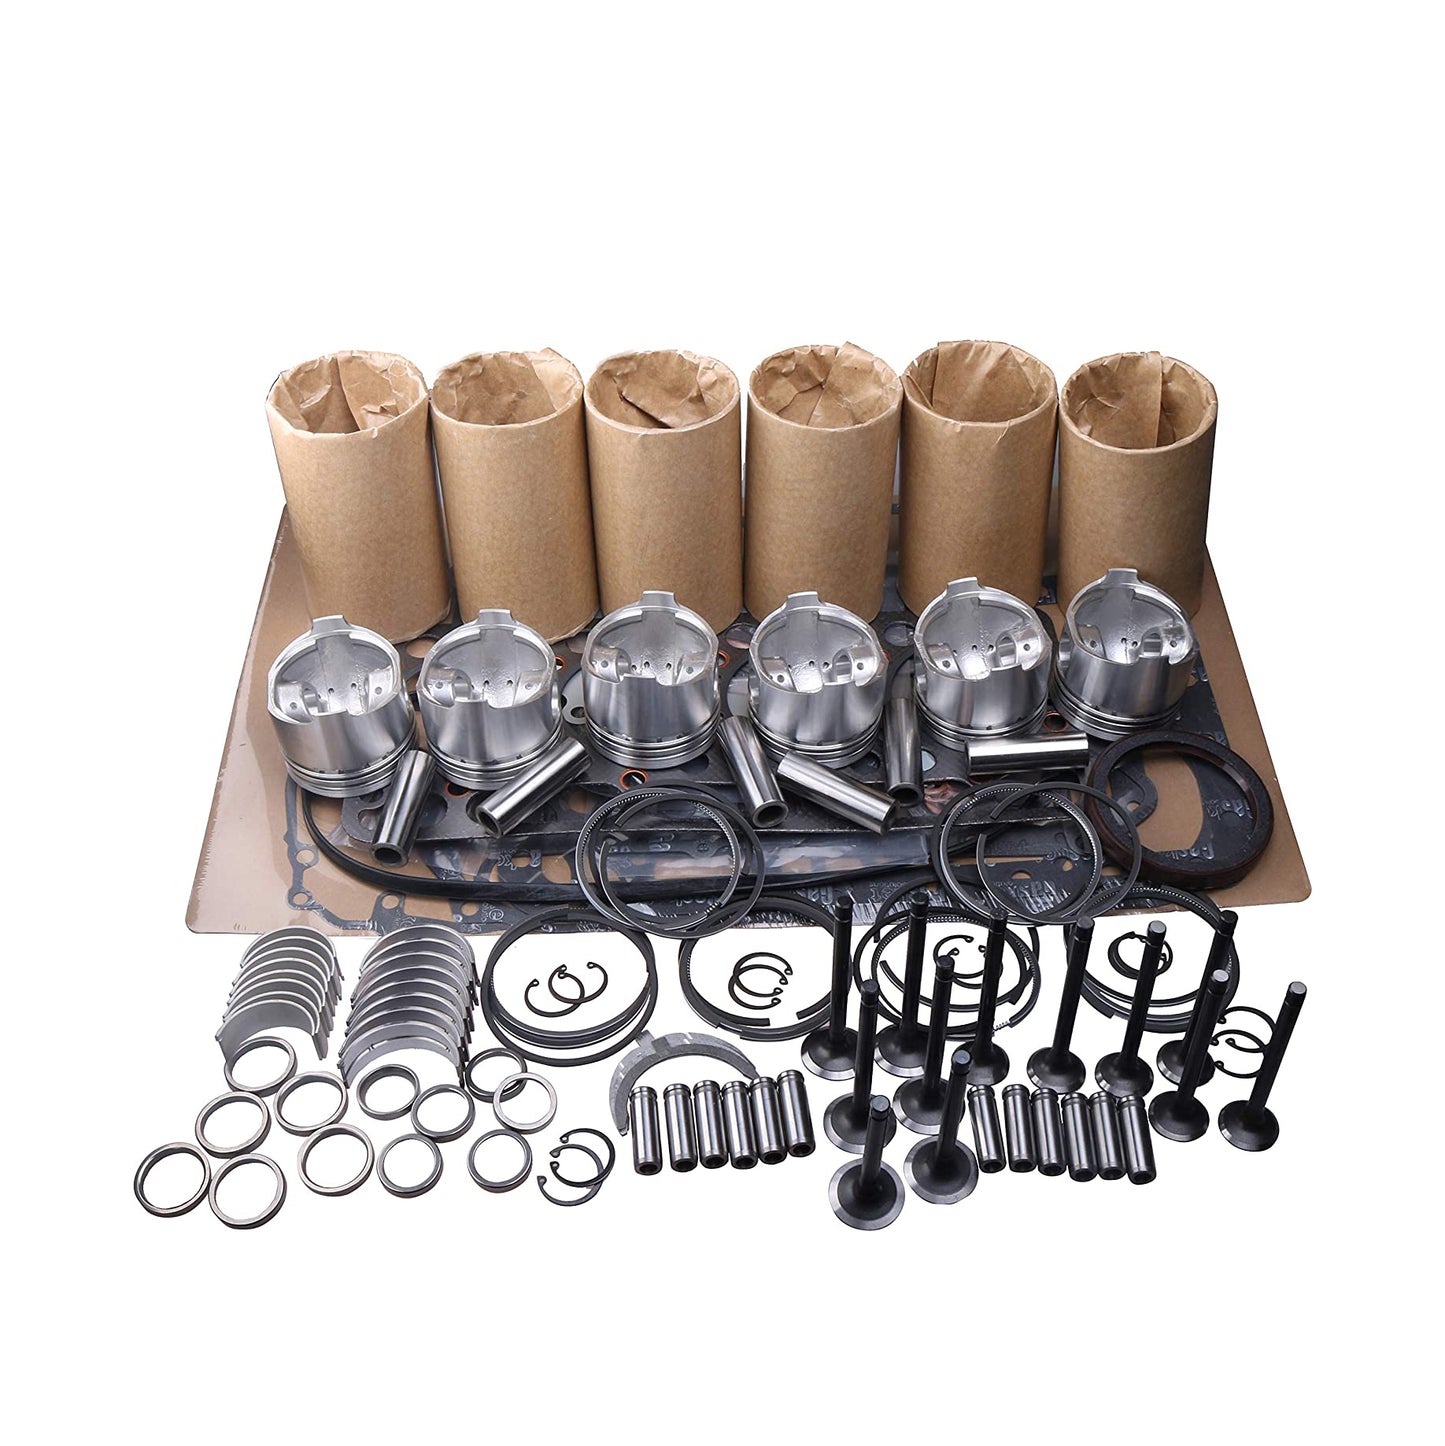 New Overhaul Rebuild Kit Compatible with Nissan TD42 Engine 1995 Nissan Patrol Y60 and Forklift Turck Vehicles